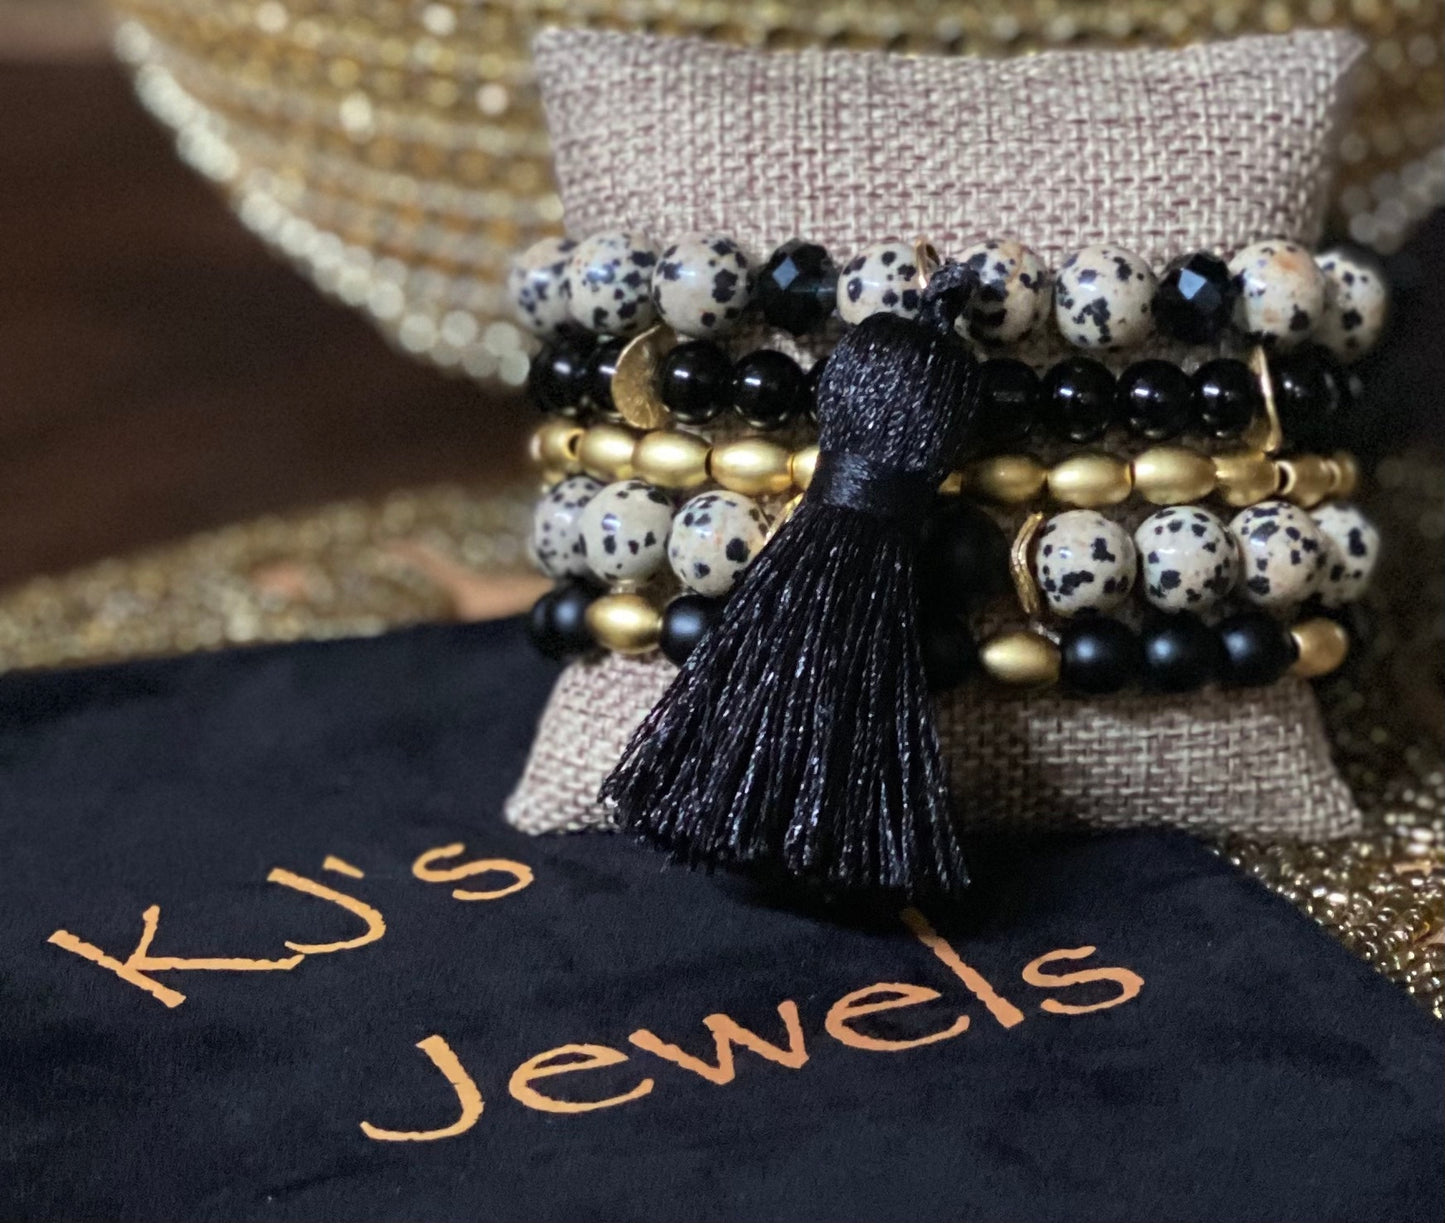 5 stretch bracelets with round Dalmatian jasper beads, gold barrel beads and round onyx beads; black knit tassel accent 